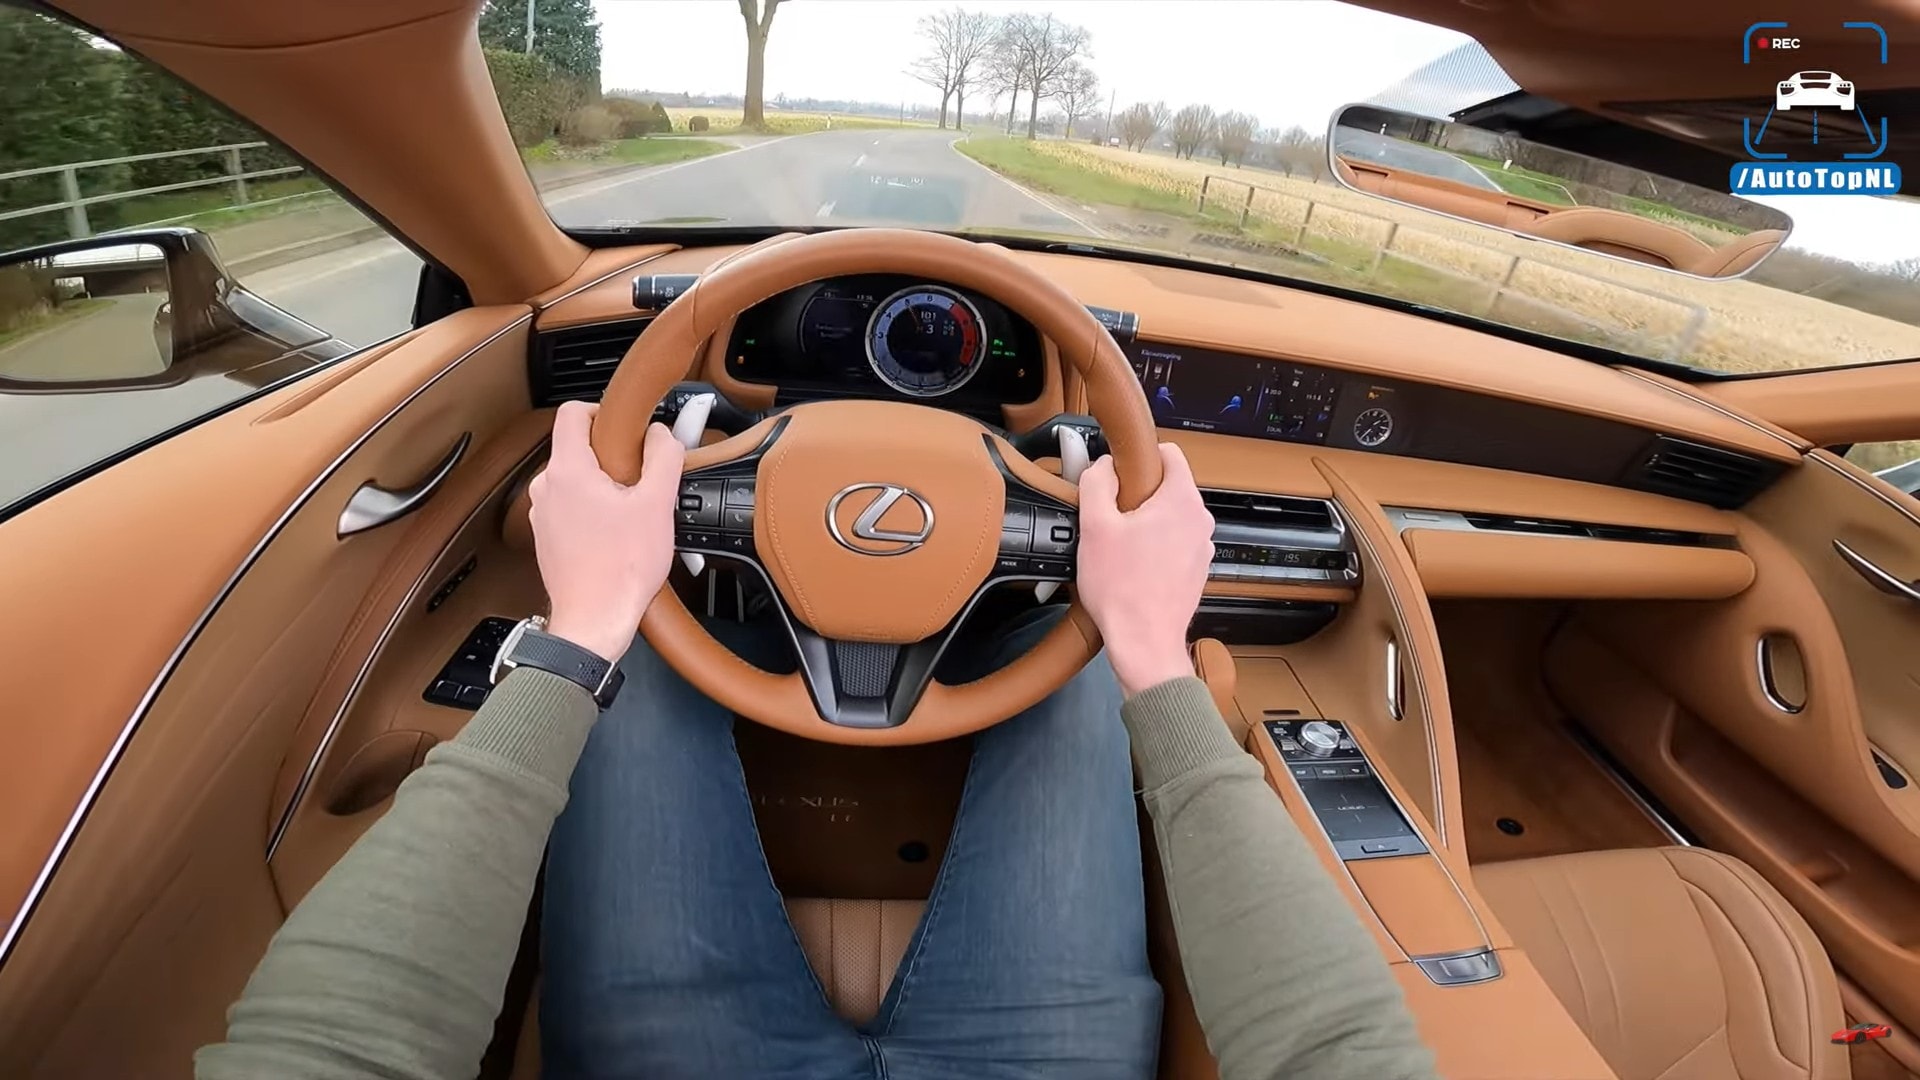 2021 Lexus Lc500 Convertible Is Properly Enjoyed With Top Down In Spirited Pov Autoevolution